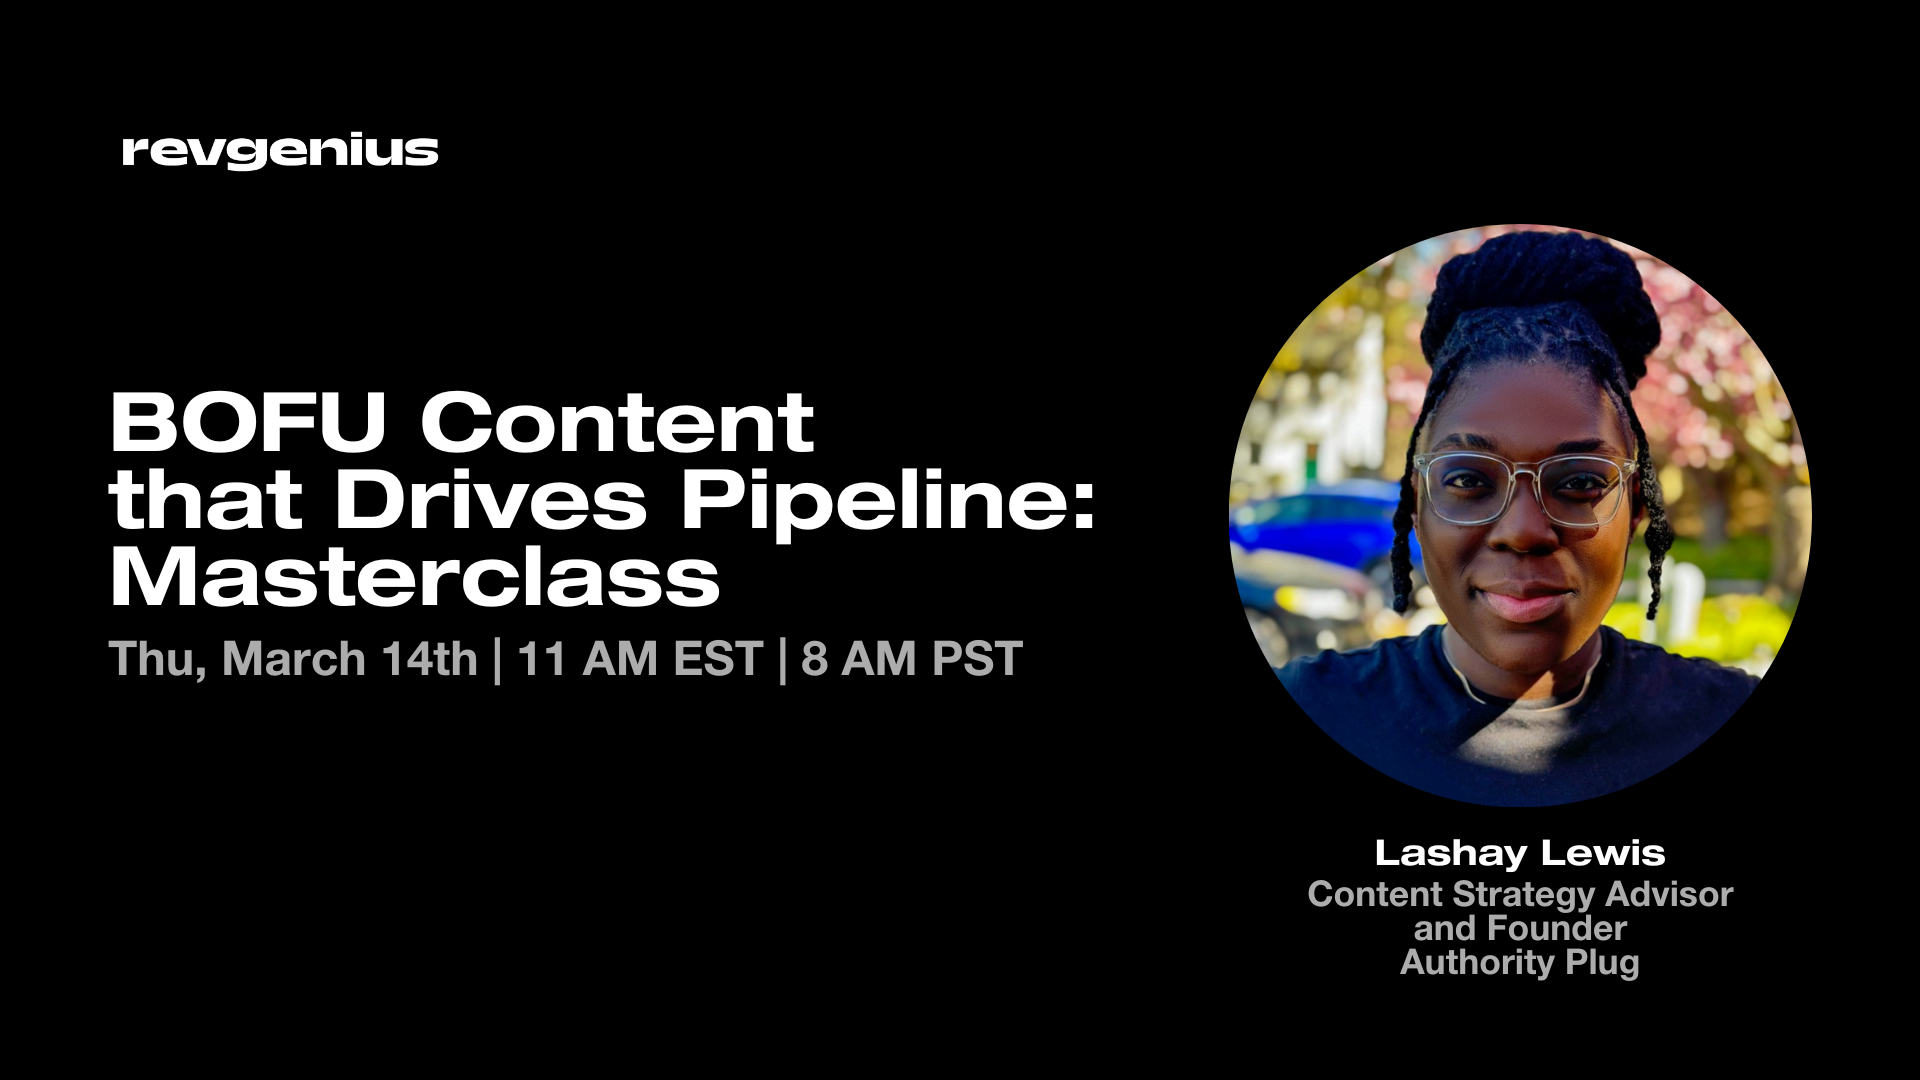 BOFU Content that Drives Pipeline Masterclass